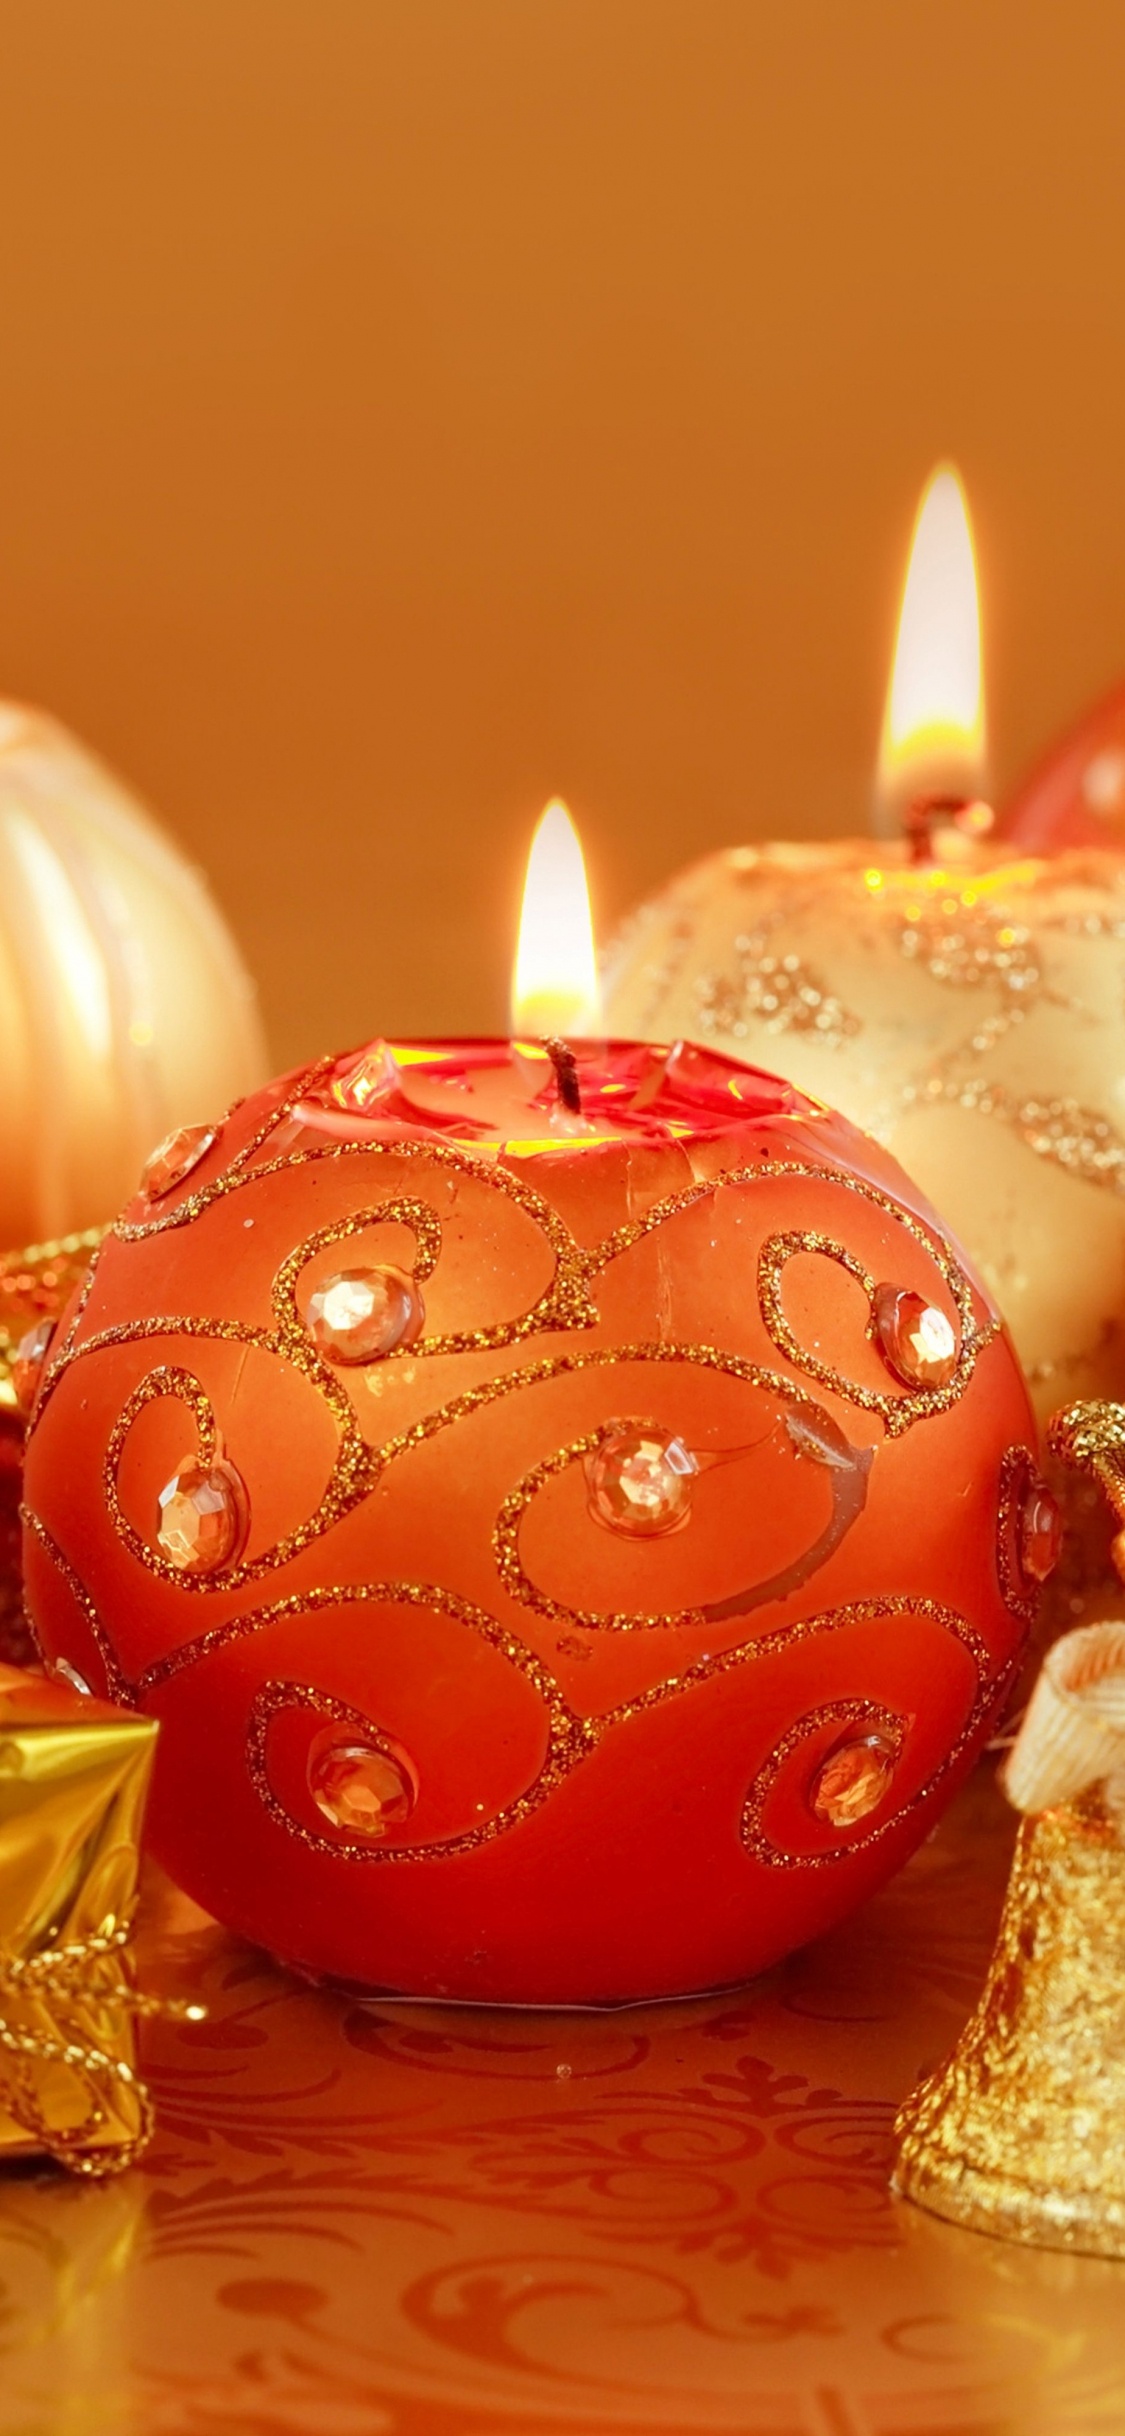 Christmas Day, New Year, Candle, Still Life, Lighting. Wallpaper in 1125x2436 Resolution